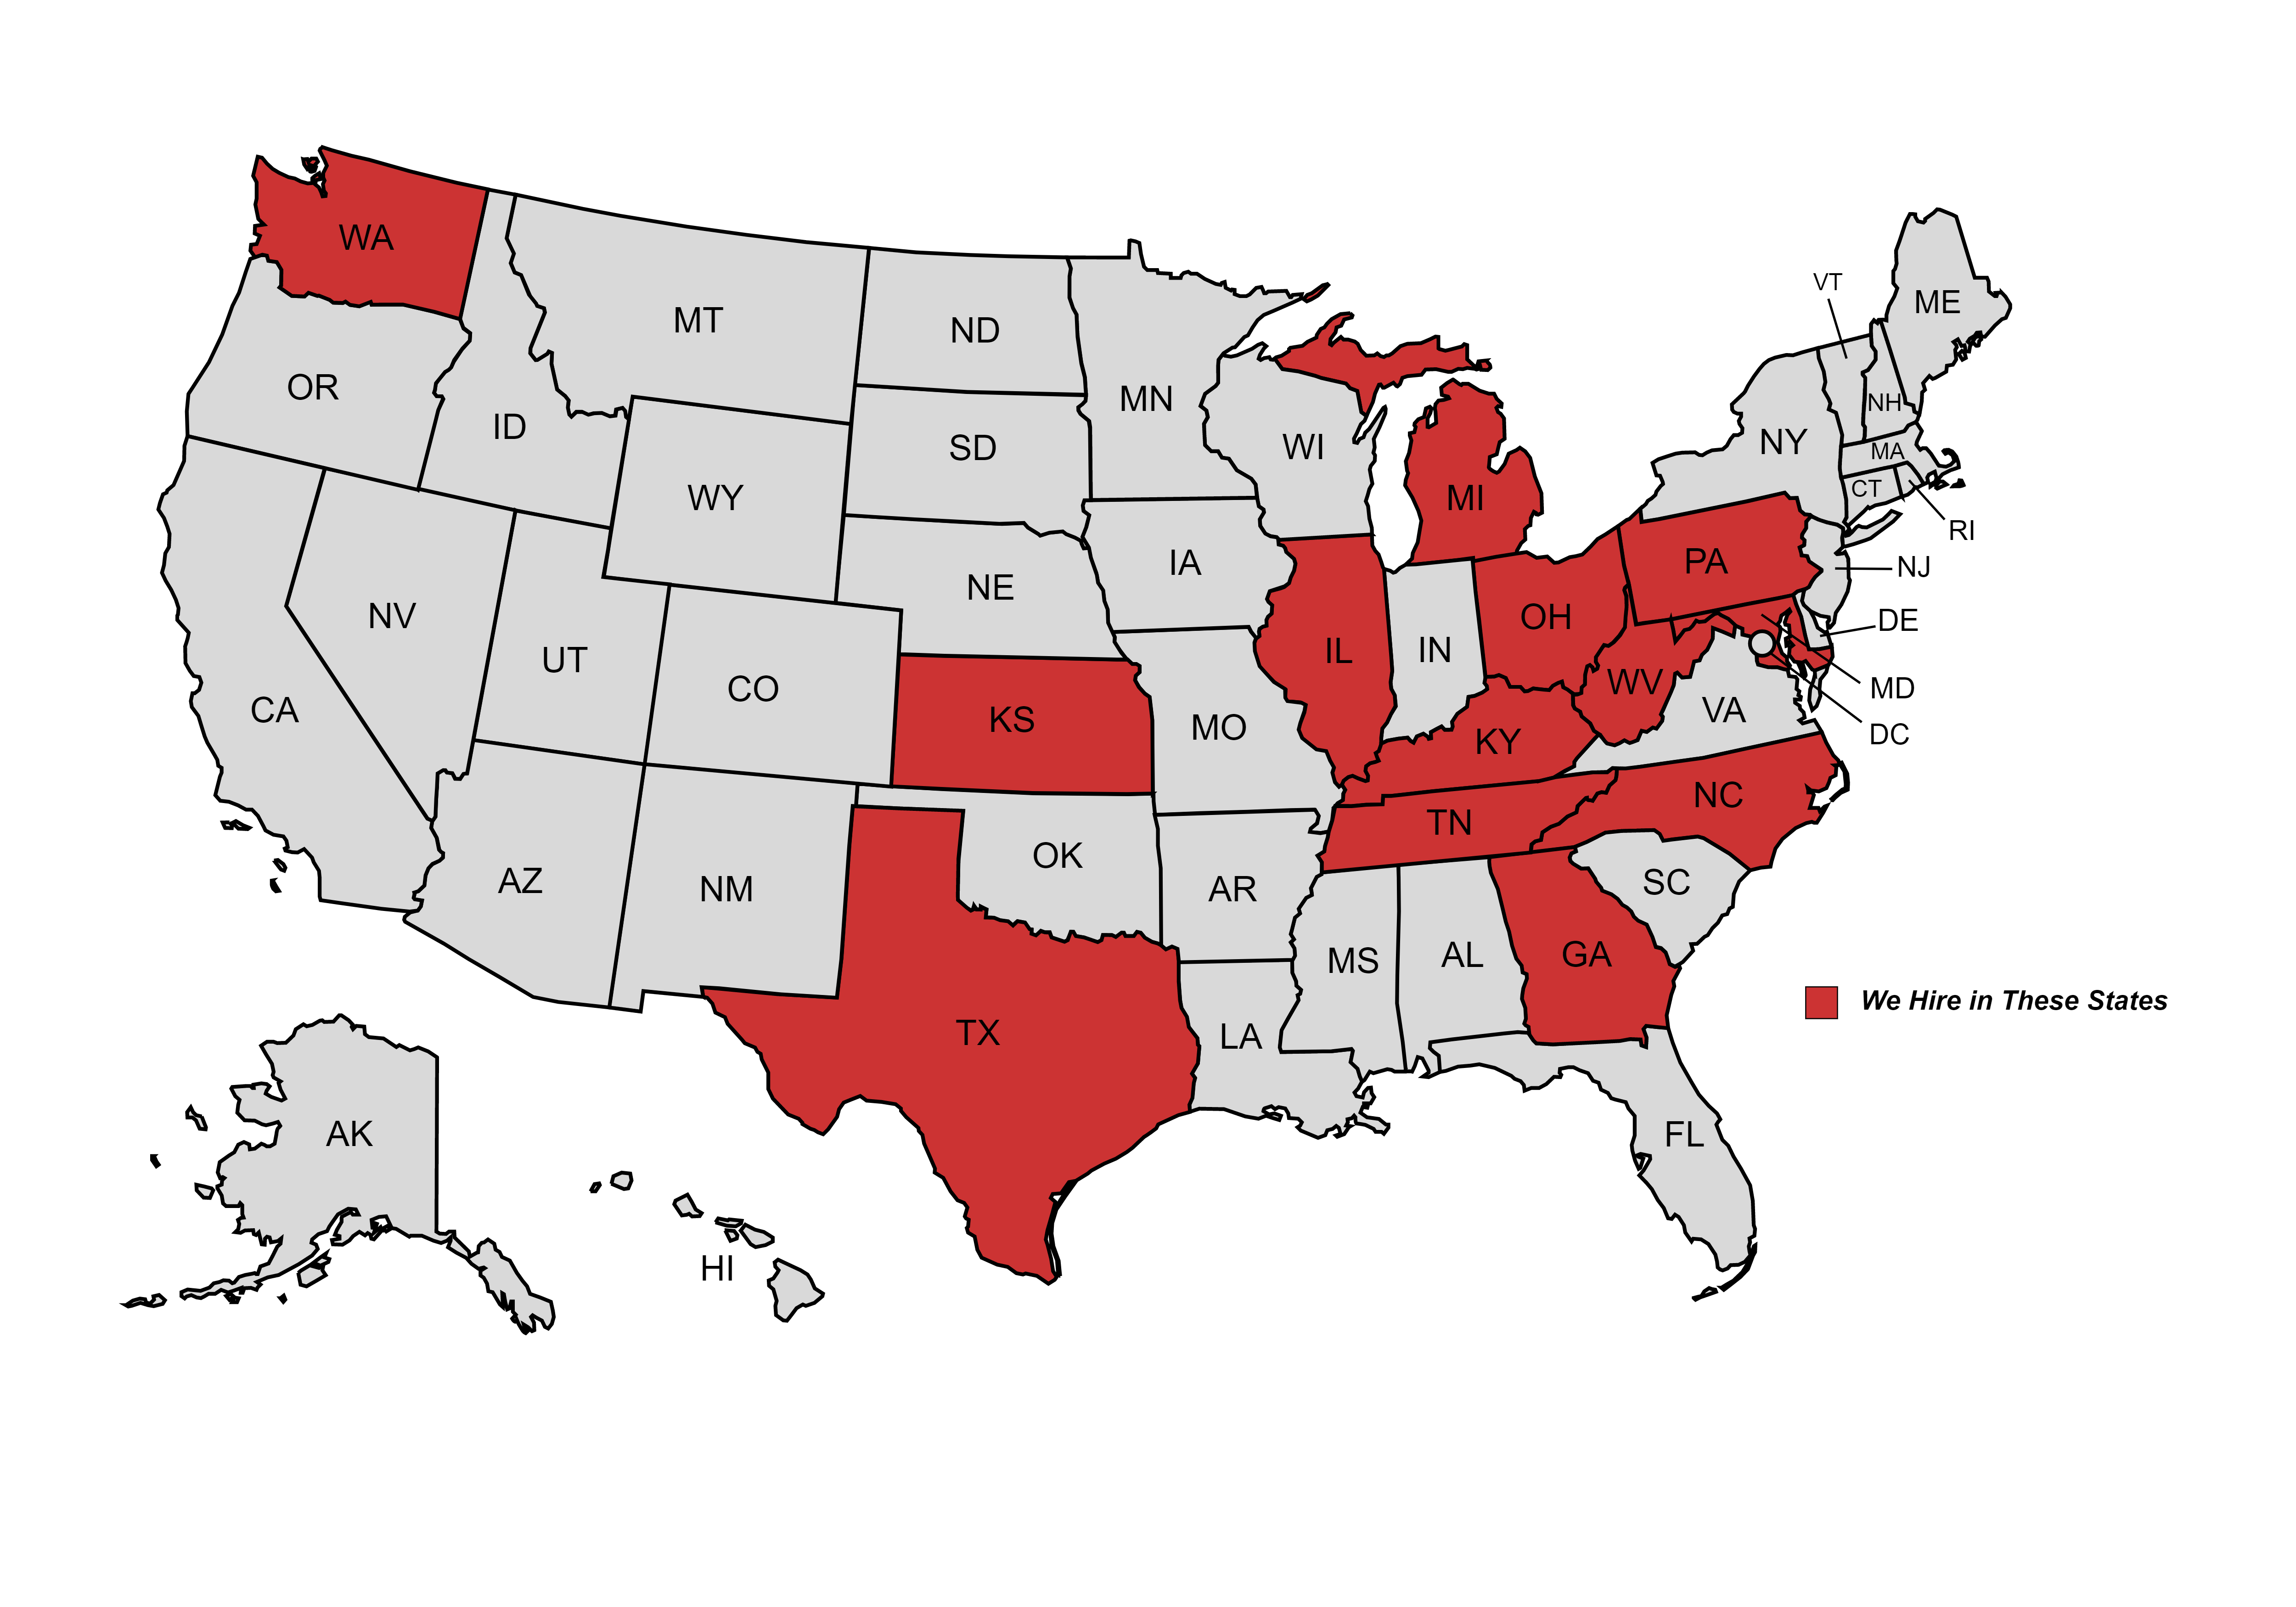 Jan Dils, Attorneys at Law, only hires in the following states: 